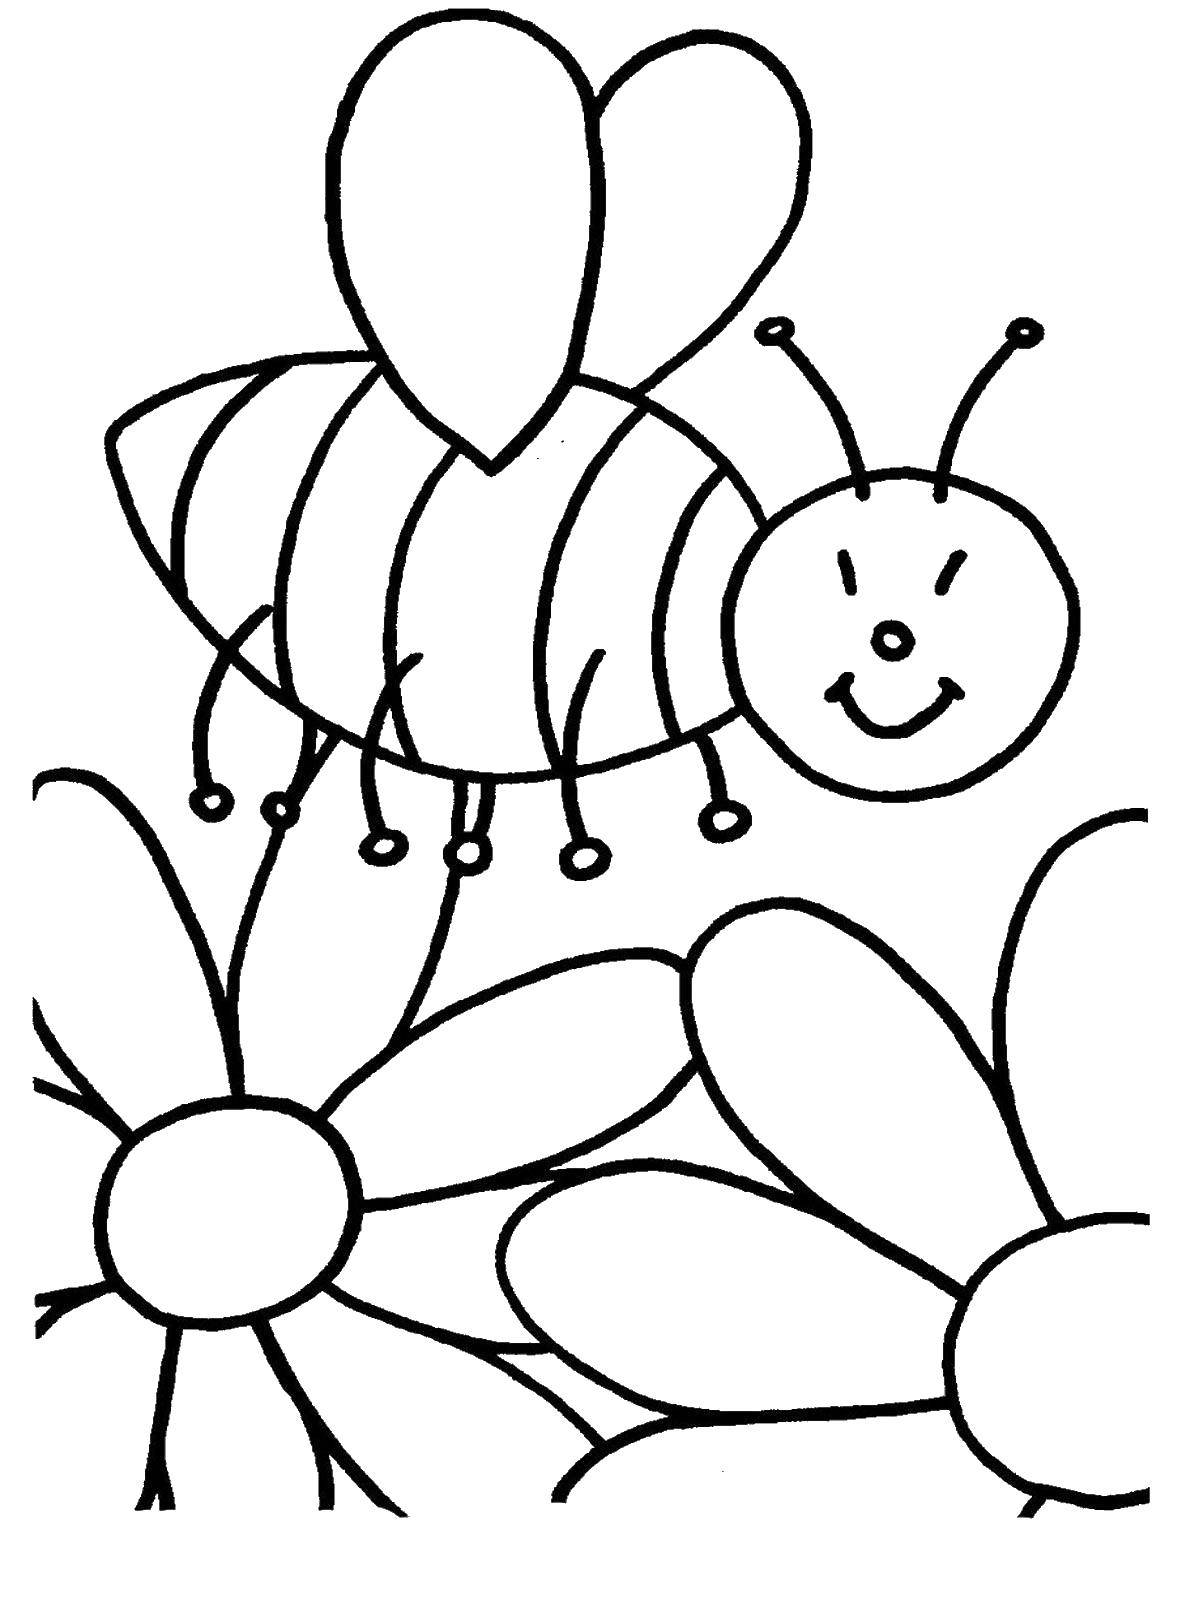 Coloring The bee loves flowers. Category Coloring pages for kids. Tags:  Insects, bee.